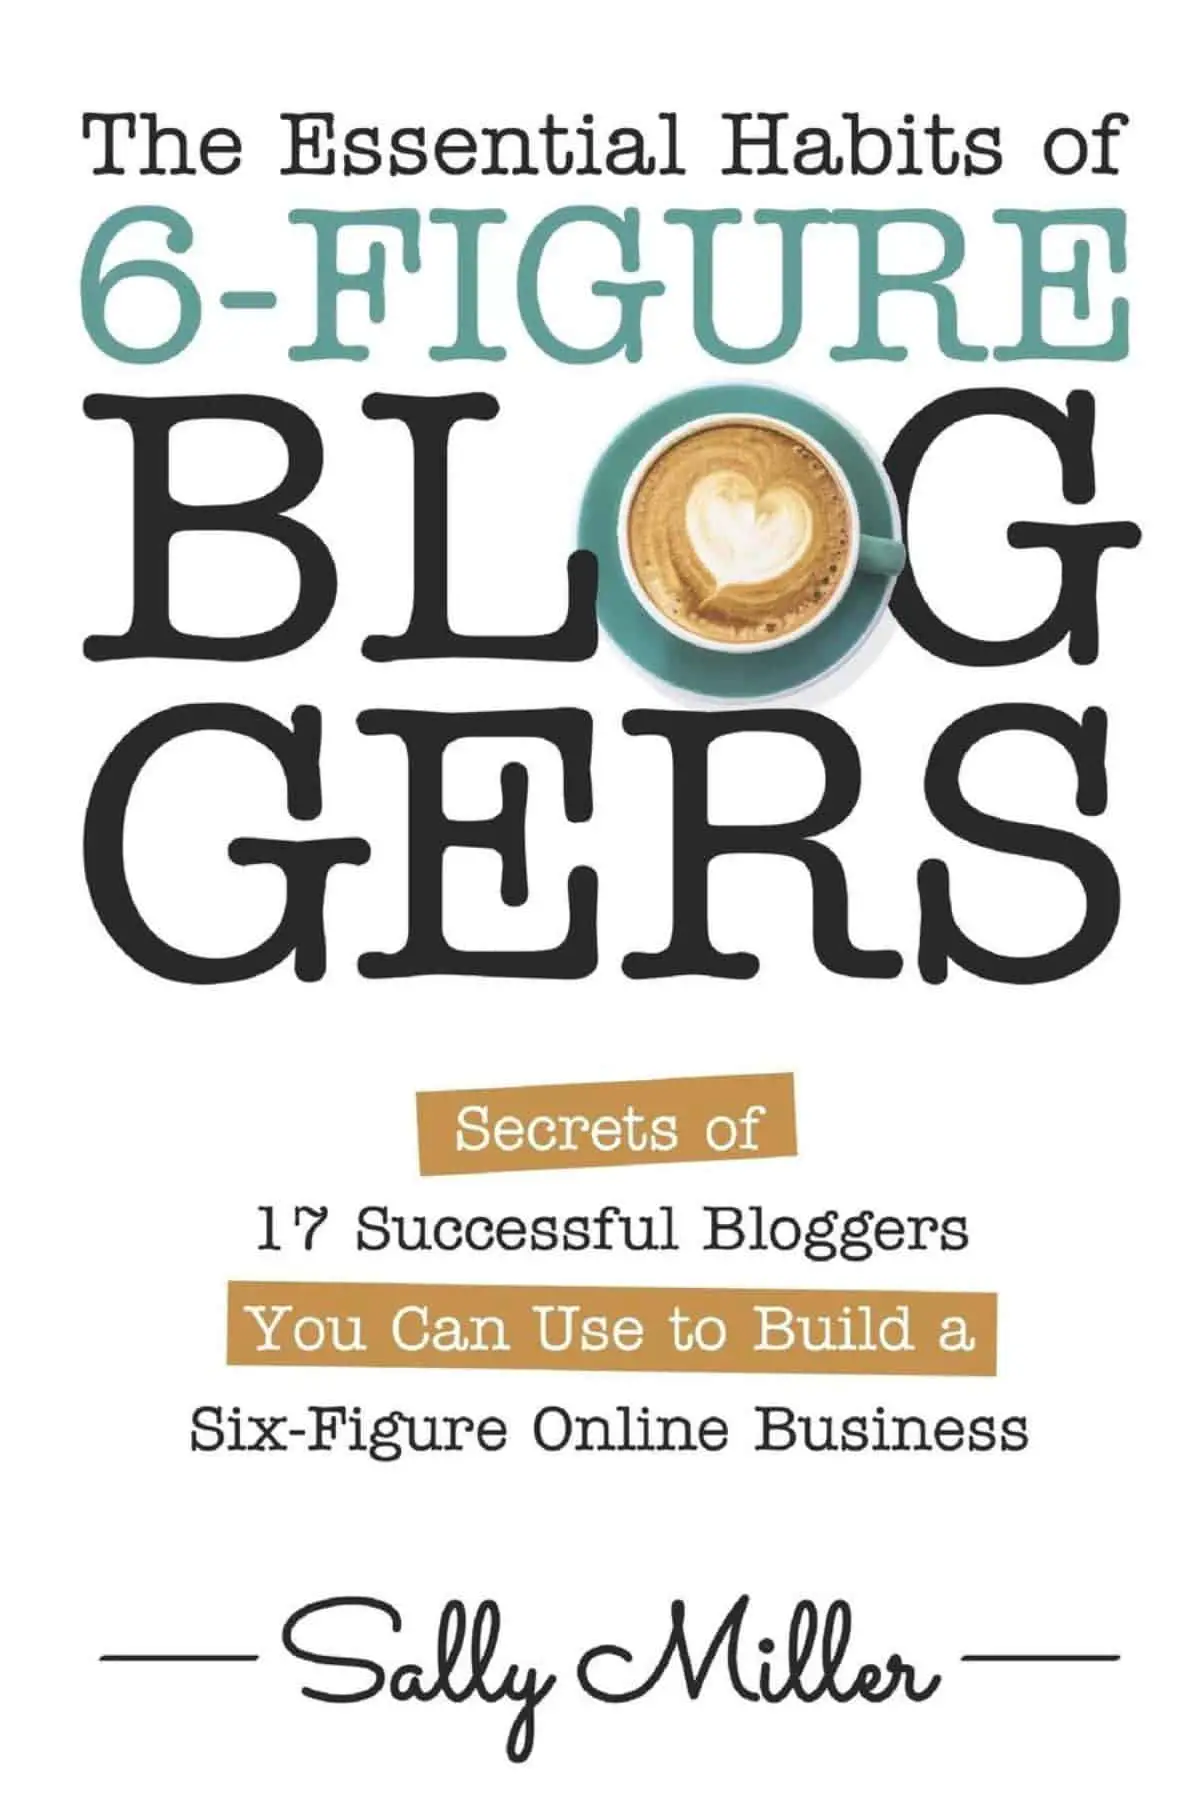 The Essential Habits Of 6-Figure Bloggers by Sally Miller ($9.99) | Amazon's Best Selling Tech Kindle eBooks